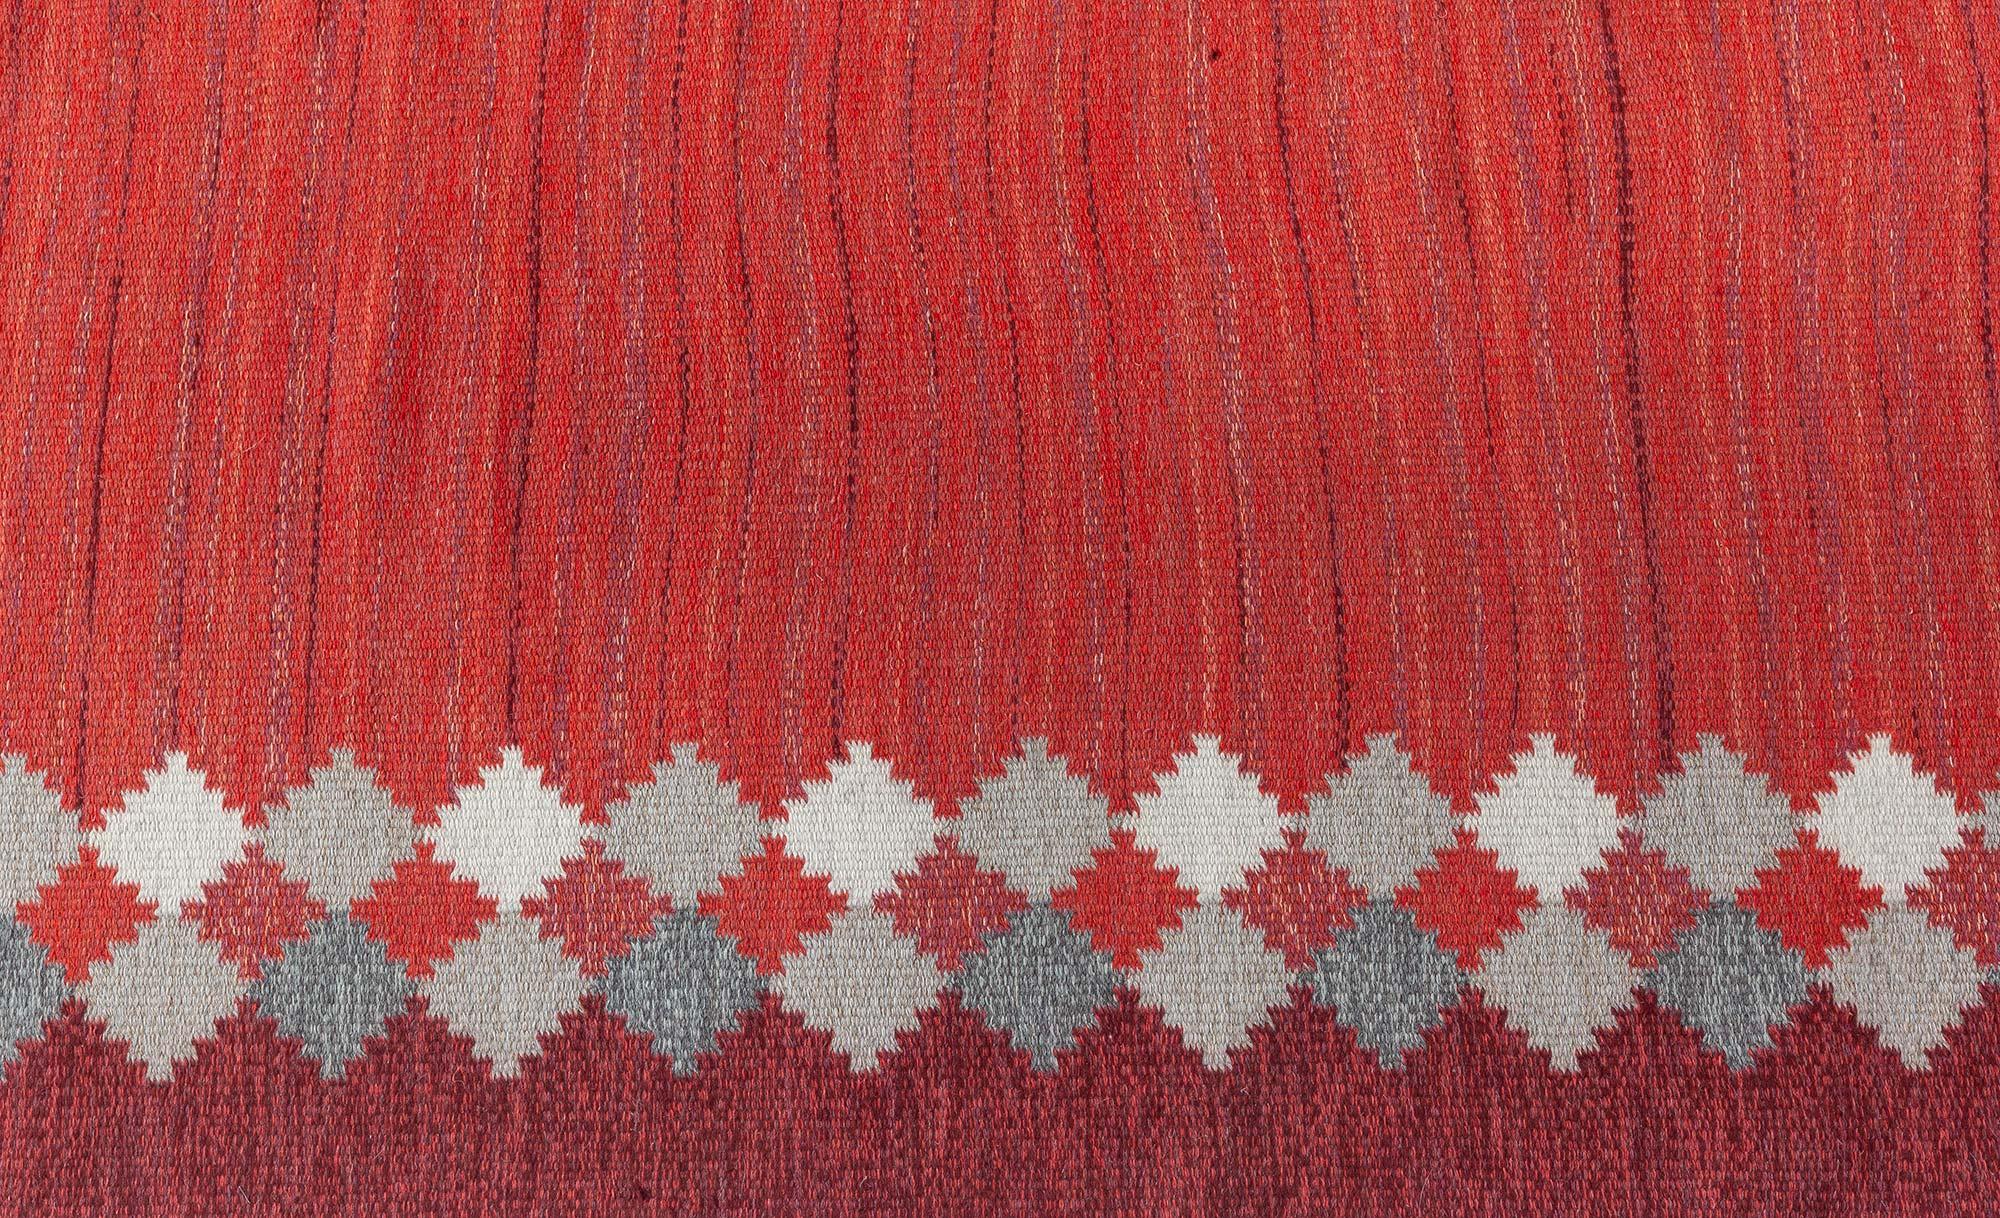 Hand-Woven Midcentury Swedish Flat Woven Rug by Ingegerd Silow For Sale